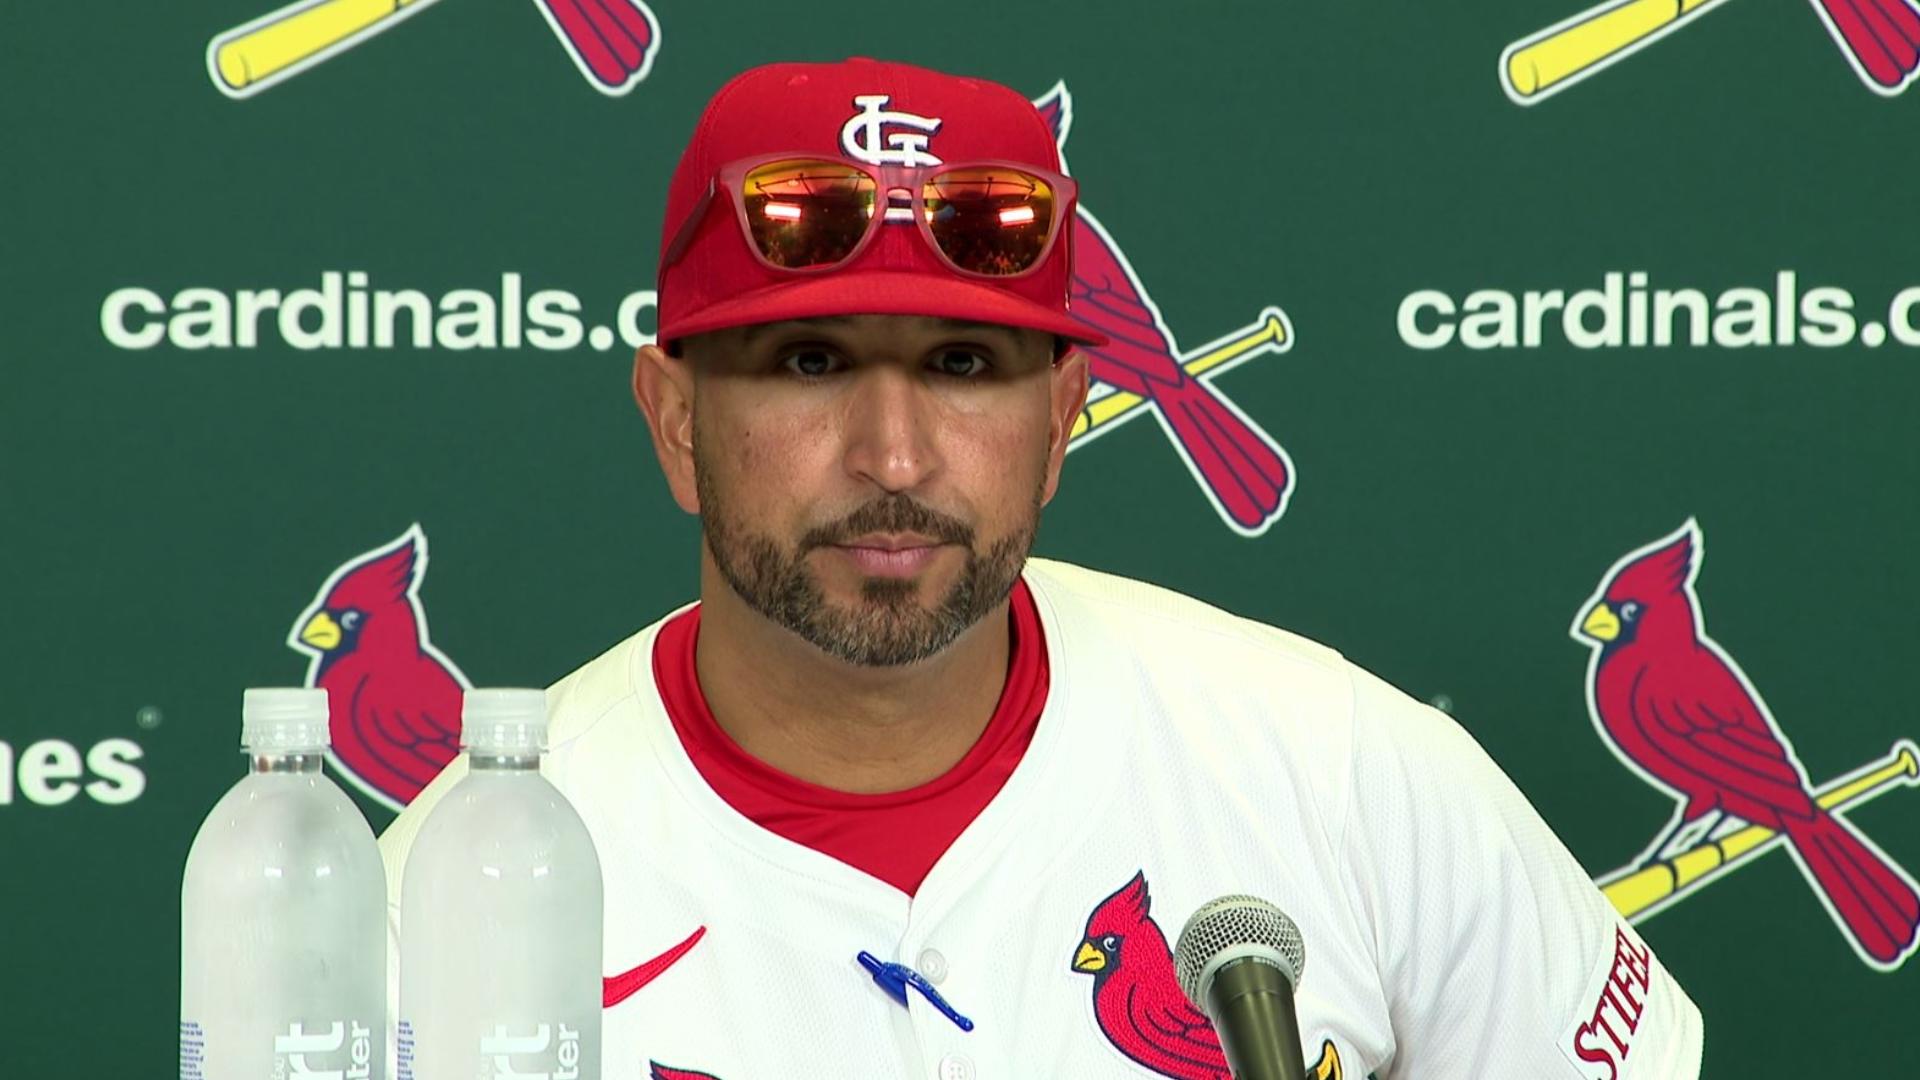 Oli Marmol discusses the St. Louis Cardinals' win over the Arizona Diamondbacks on Wednesday. Lars Nootbaar drove in two runs and Kyle Gibson pitched six innings.